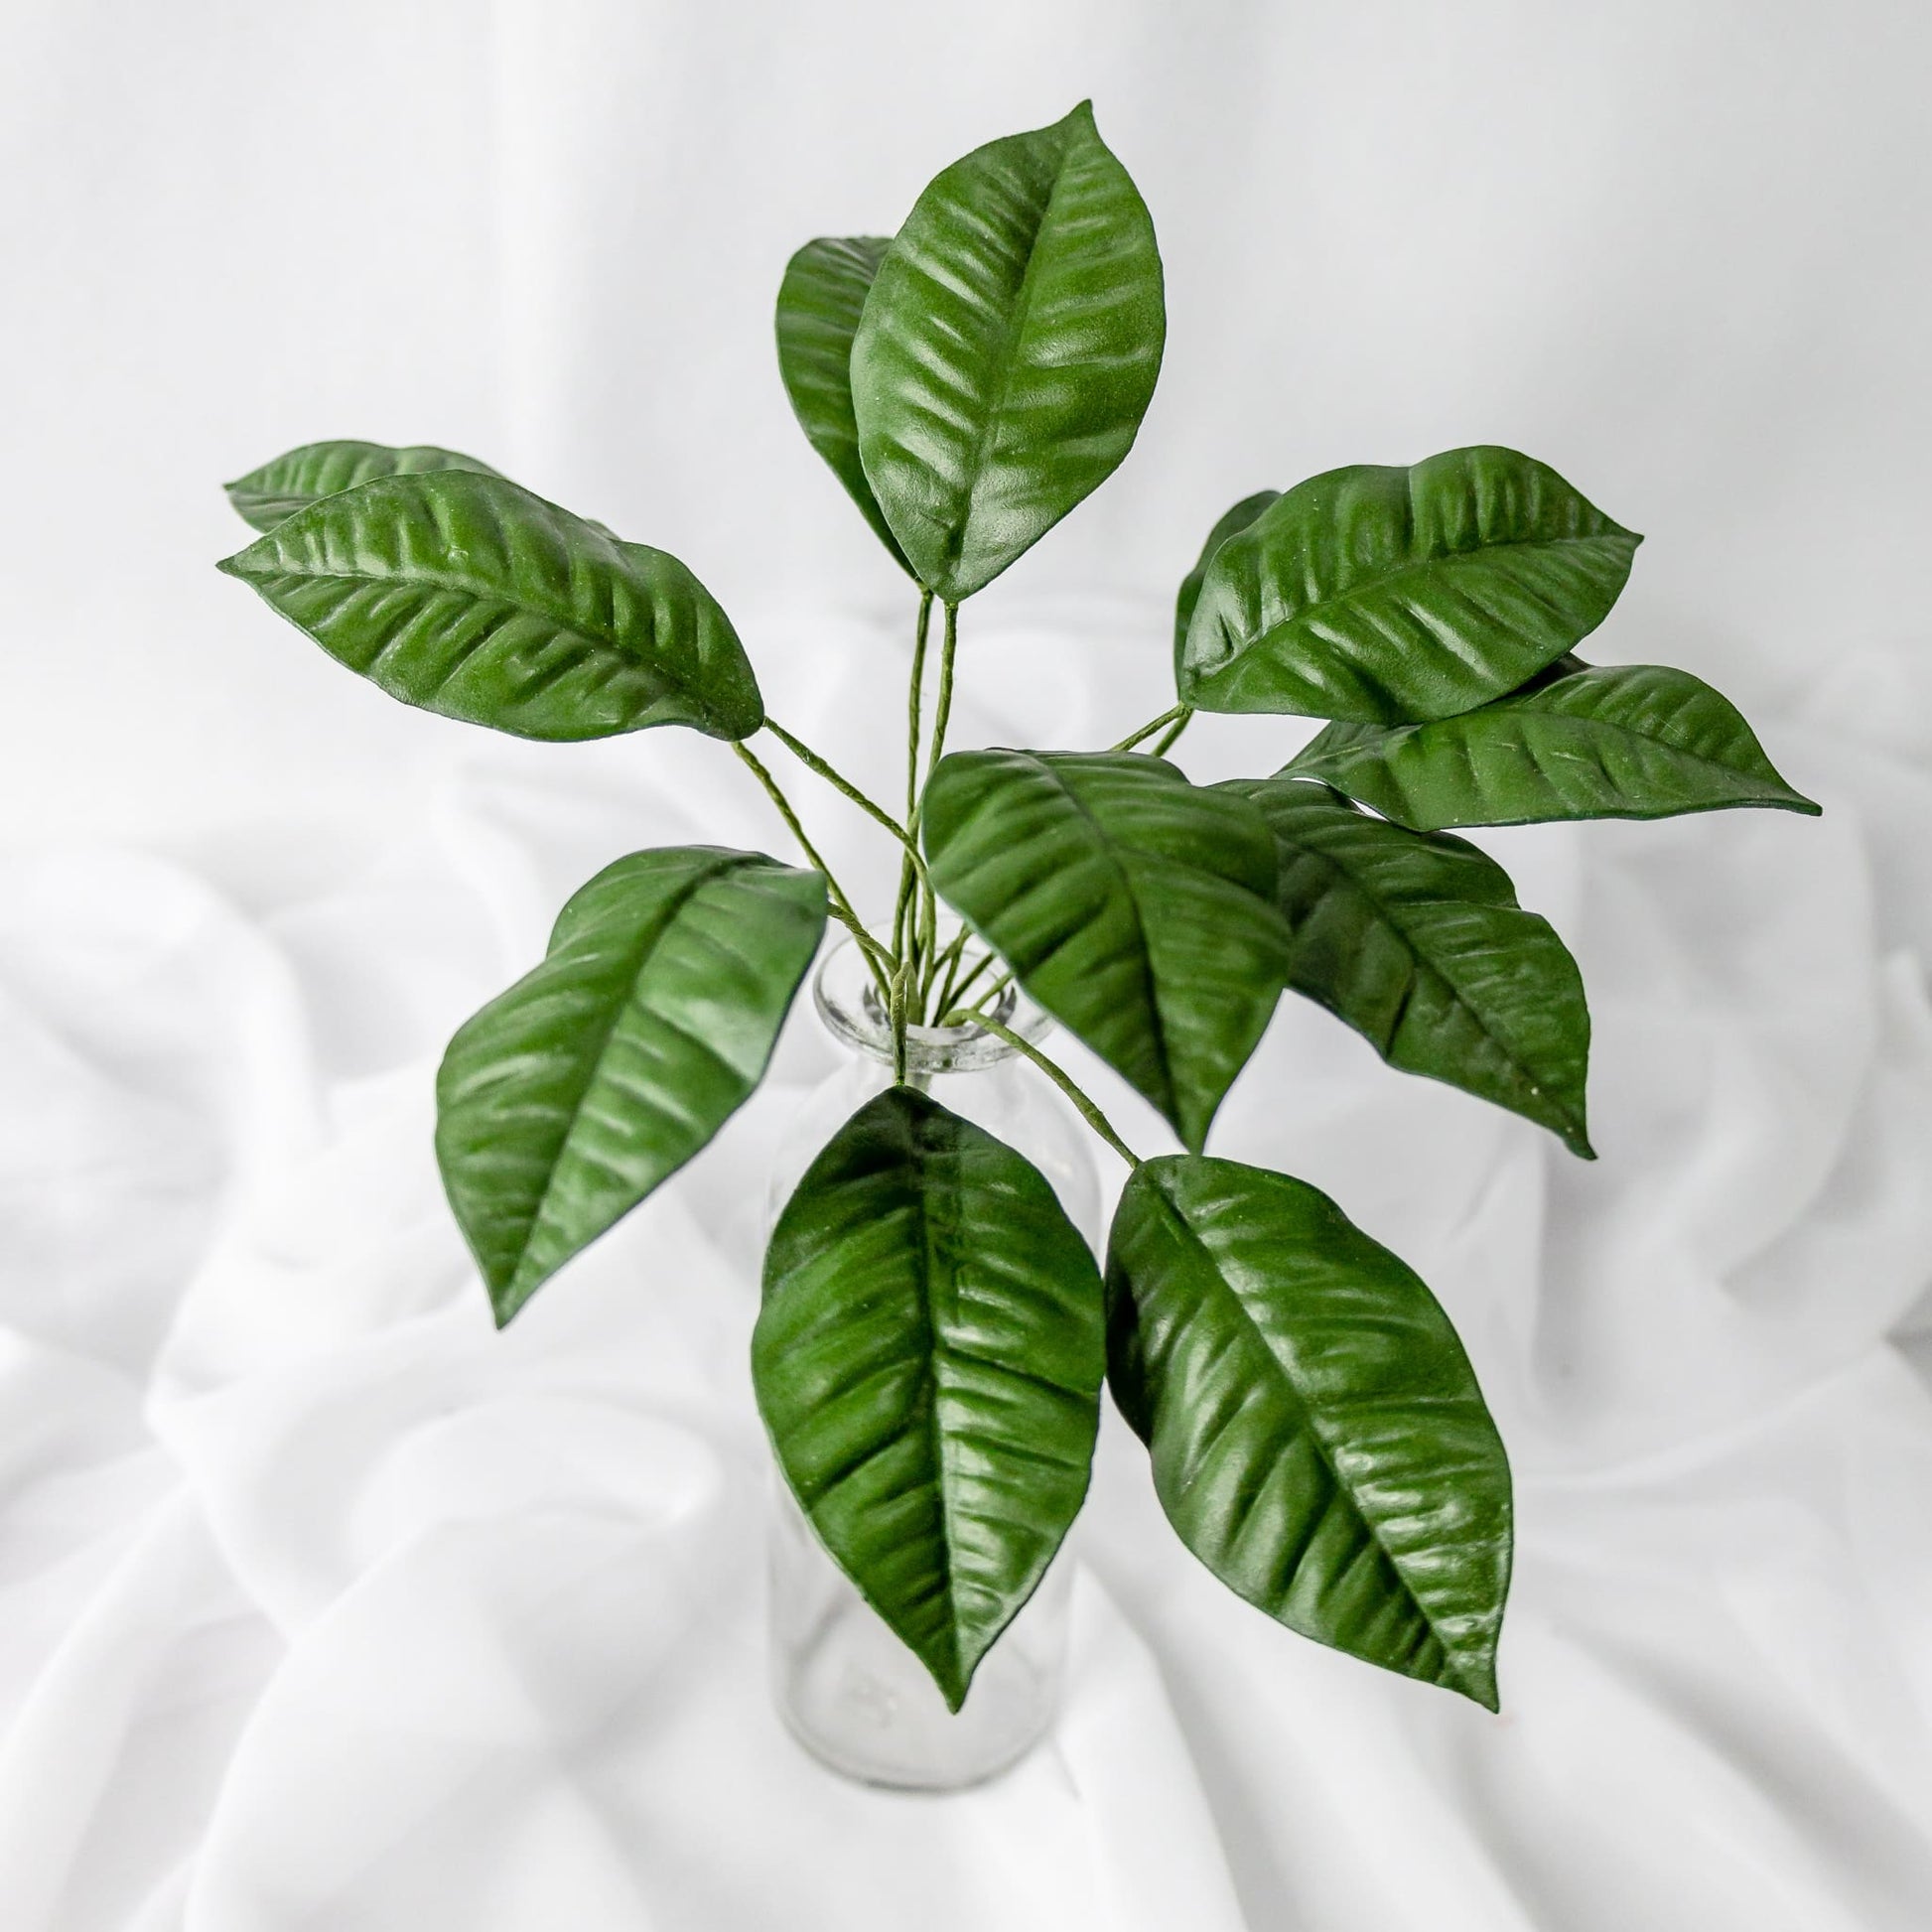 artificial mini gardenia leaves placed in transparent glass vase